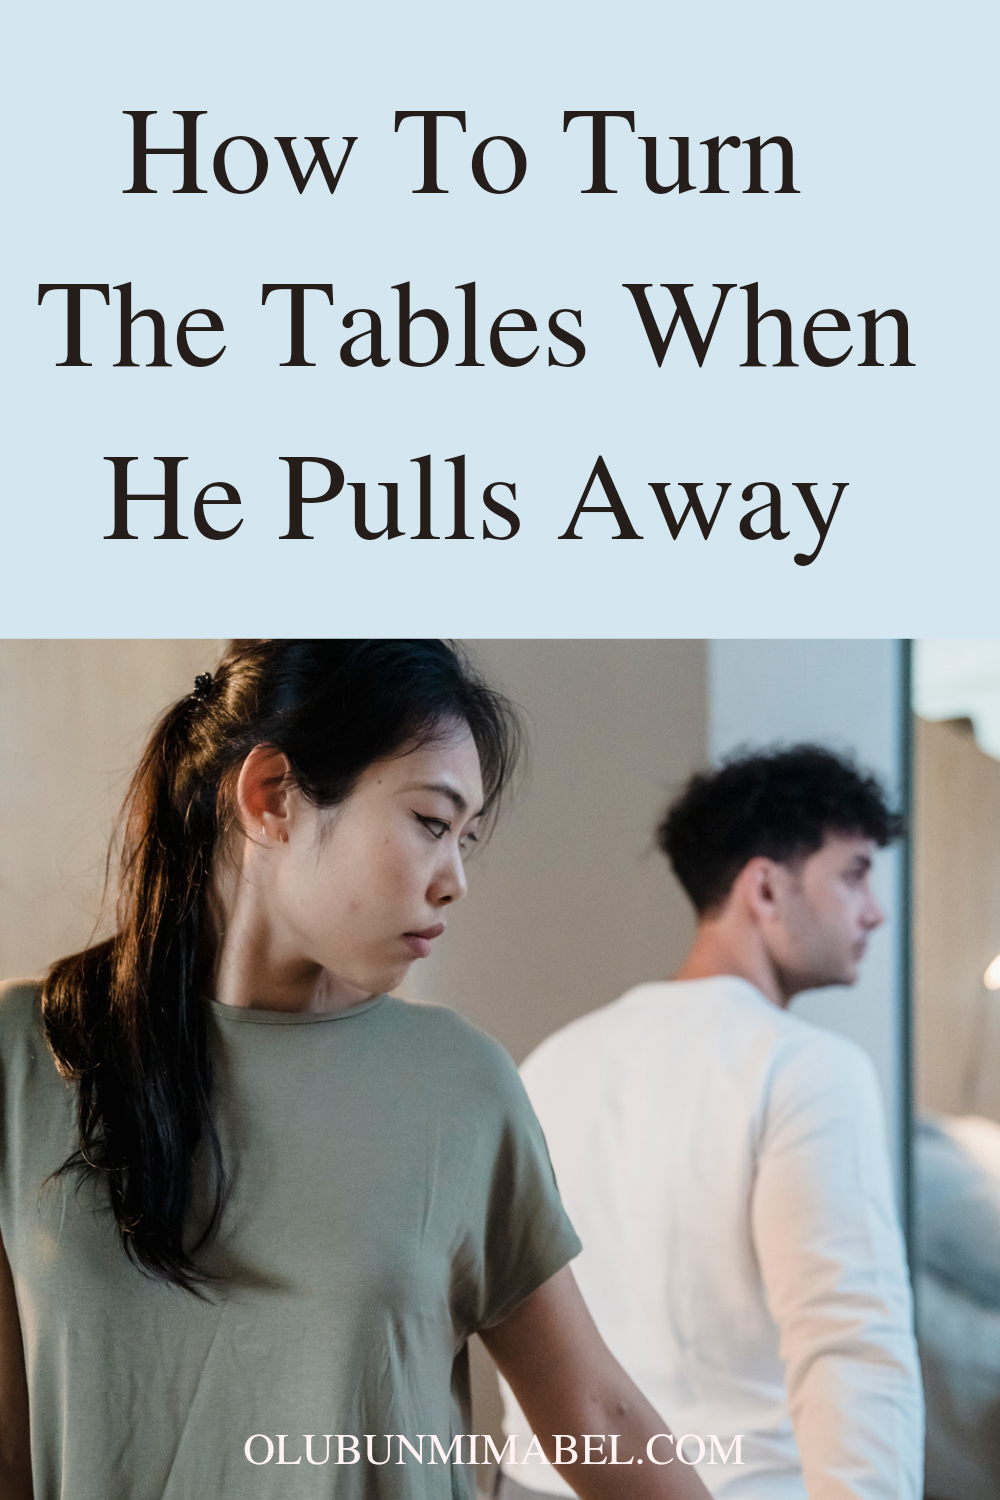 How To Turn The Tables When He Pulls Away